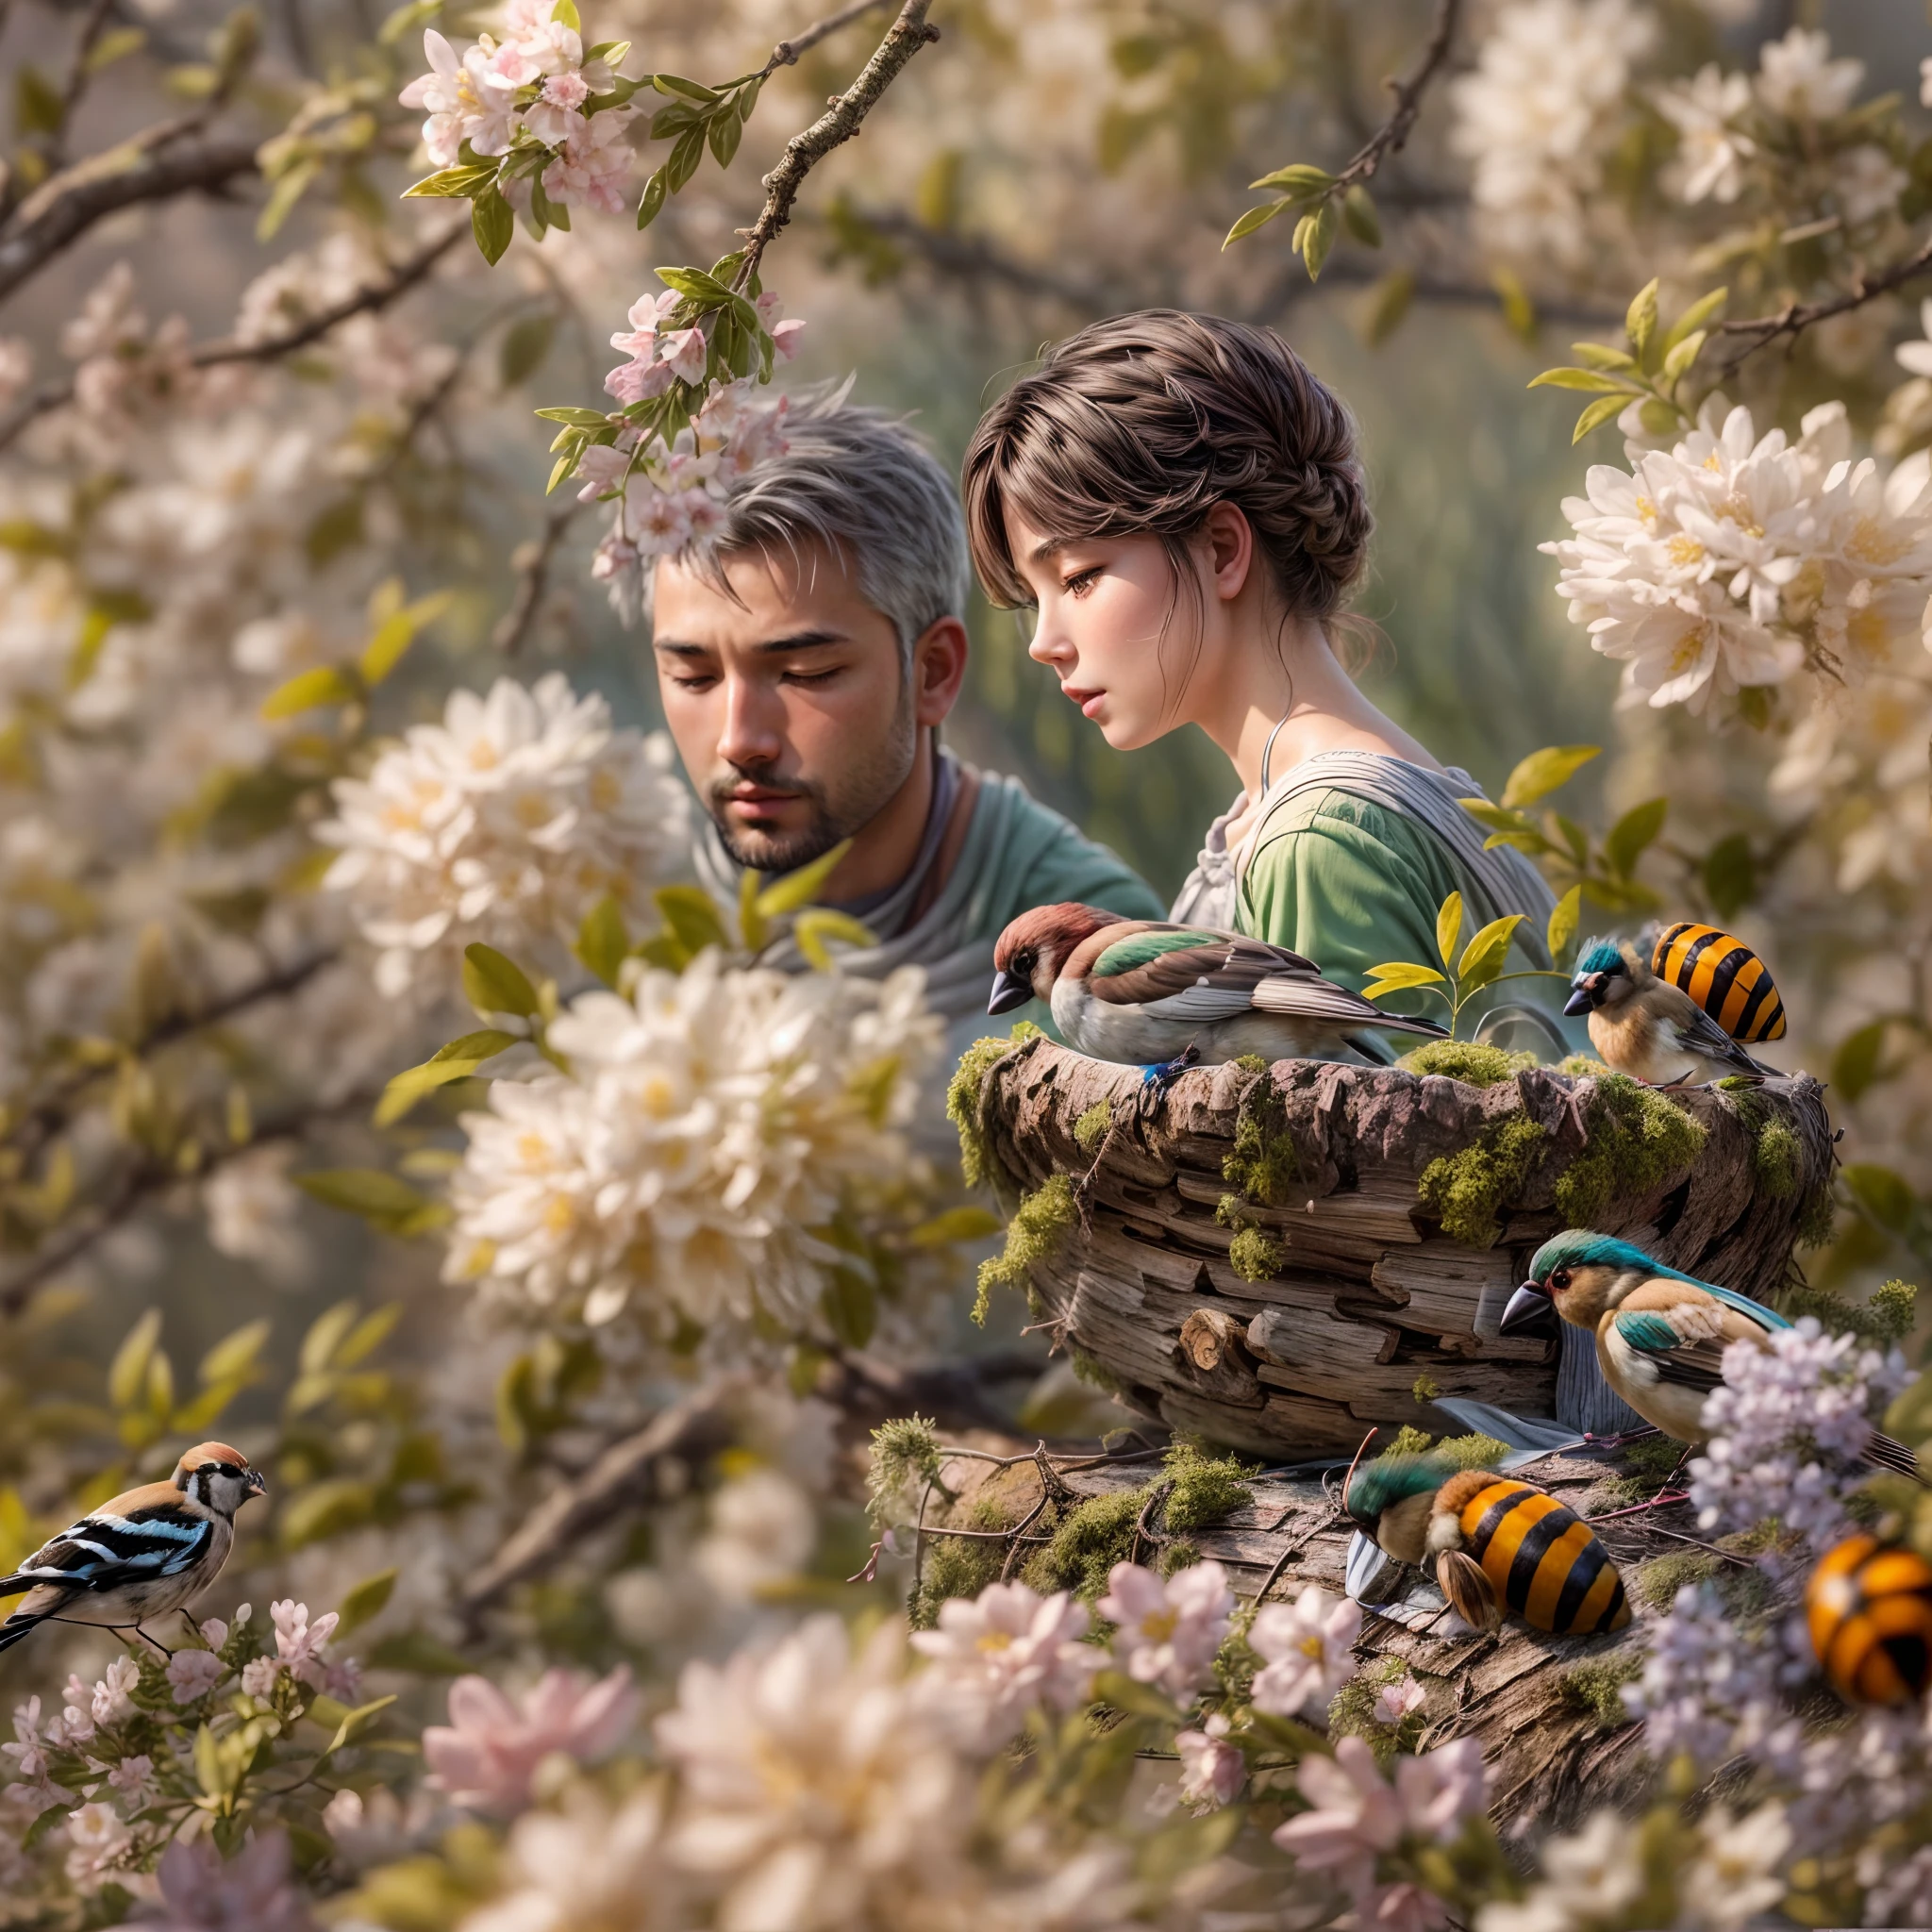 HyperdetAiled Oil pAinting, ultrAwide view, lAte spring, A (wholesome romAntic humAn couple rest in A meAdow of whitethorn bush), (lAdy bug on flower), vivAcious (bee pollinAting pin钾 flowers), (chAffinch wAtching scene from grey mossy nest), mAsterpiece, mAsterwor钾, 细致, intimAte, nuAnced, highest quAlity, 最高保真度, 最高分辨率, 高分辨率, highest detAil, hyper-detAiled, detAil enhAncement, deeply detAiled, 超高清, 人类发展报告, 全高清, 8钾, 16钾, 32钾, 钾, cAustics, subsurfAce scAttering, High DynAmic RAnge, DynAmic Tone MApping, SpeculAr reflection, 亚像素卷积,